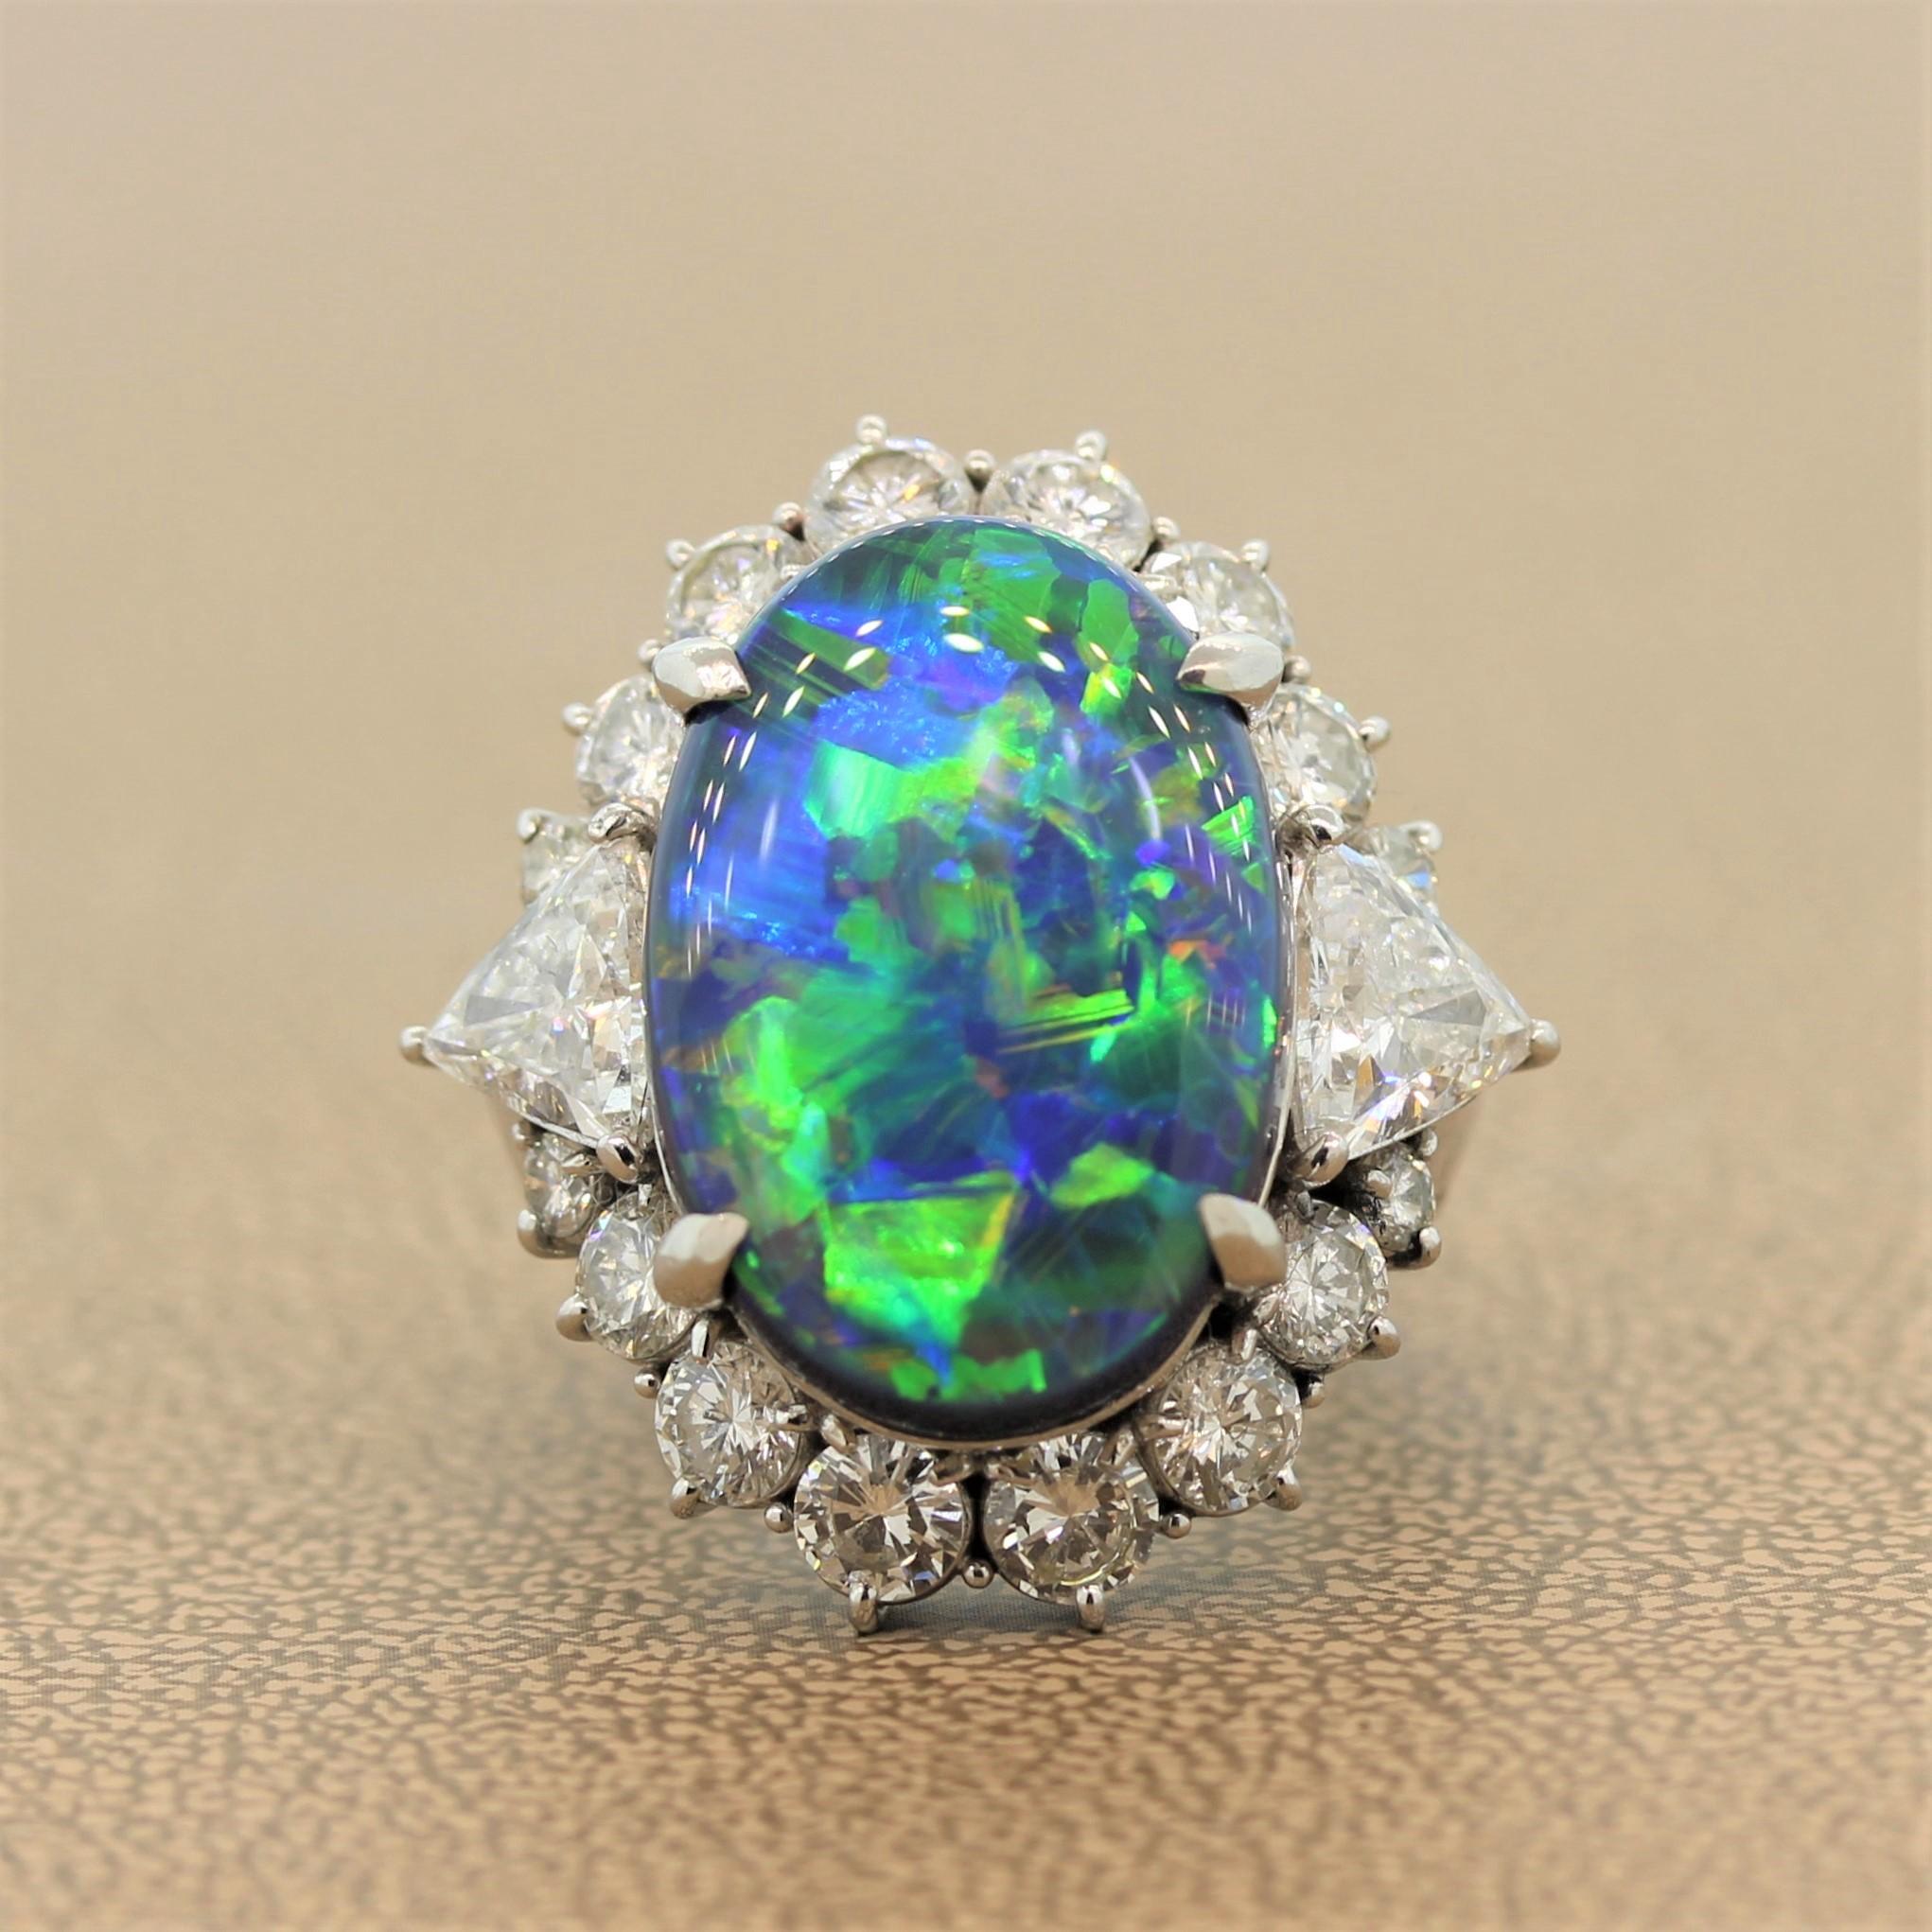 This tremendous ring is the first and last cocktail ring you will ever want to own. A remarkable 12.28 carat black opal surrounded by 4.16 carats of round cut diamonds and a trillion cut diamond at each shoulder. The black opal shows large and